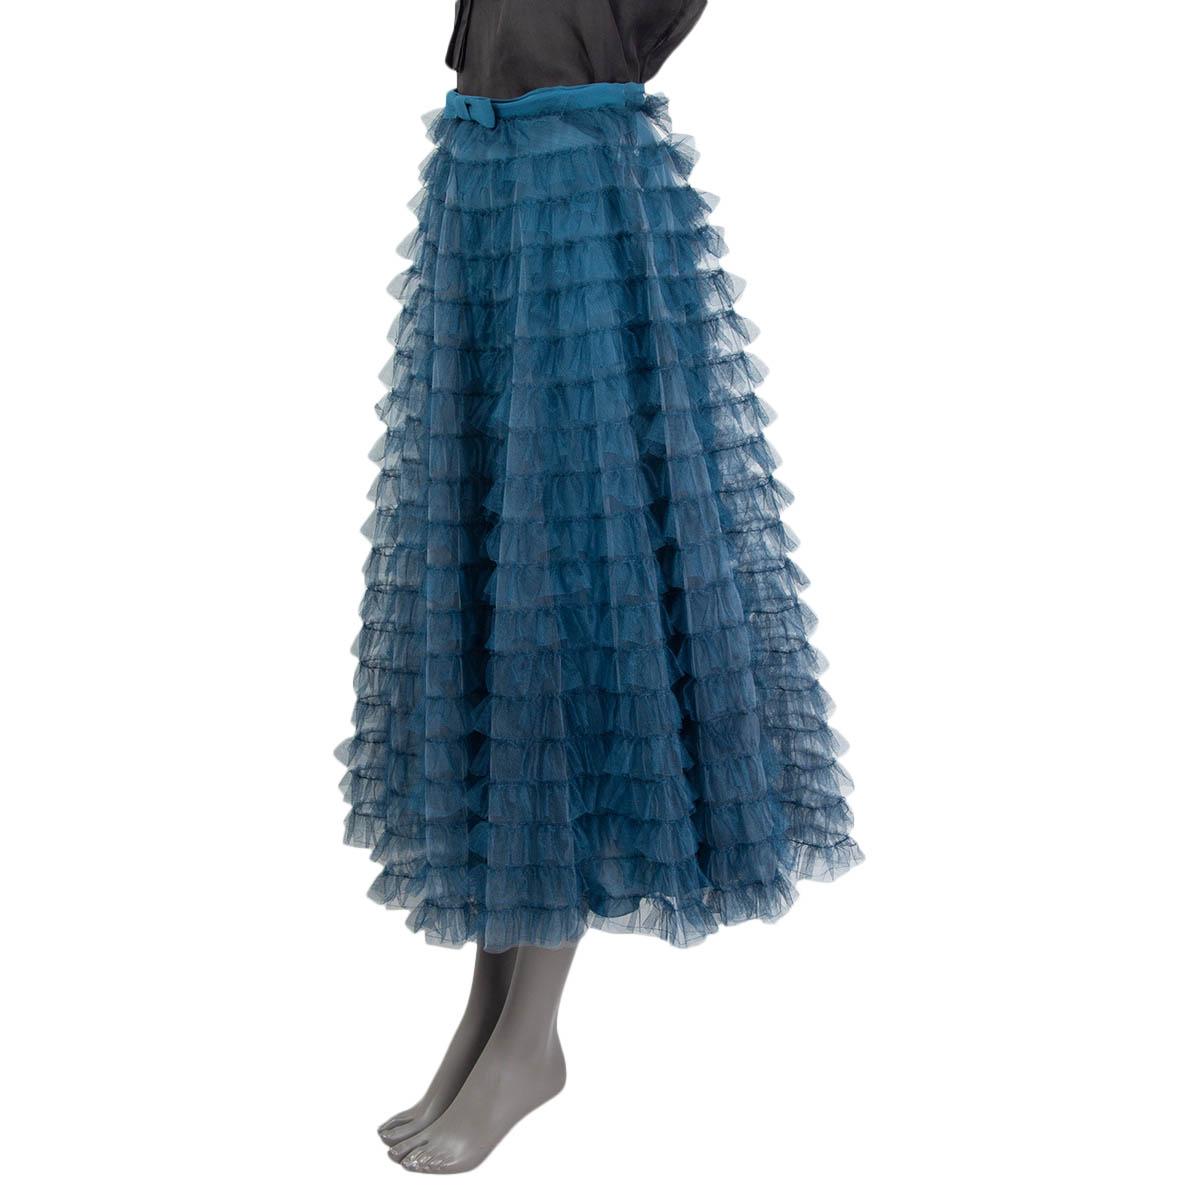 100% authentic Christian Dior 2021 frilled midi skirt in gradient blue tulle (100% polyester - please note the content tag is missing). Bow at the waist on the front. Opns with five push buttons and two hooks at the side. Comes with a silk (assumed